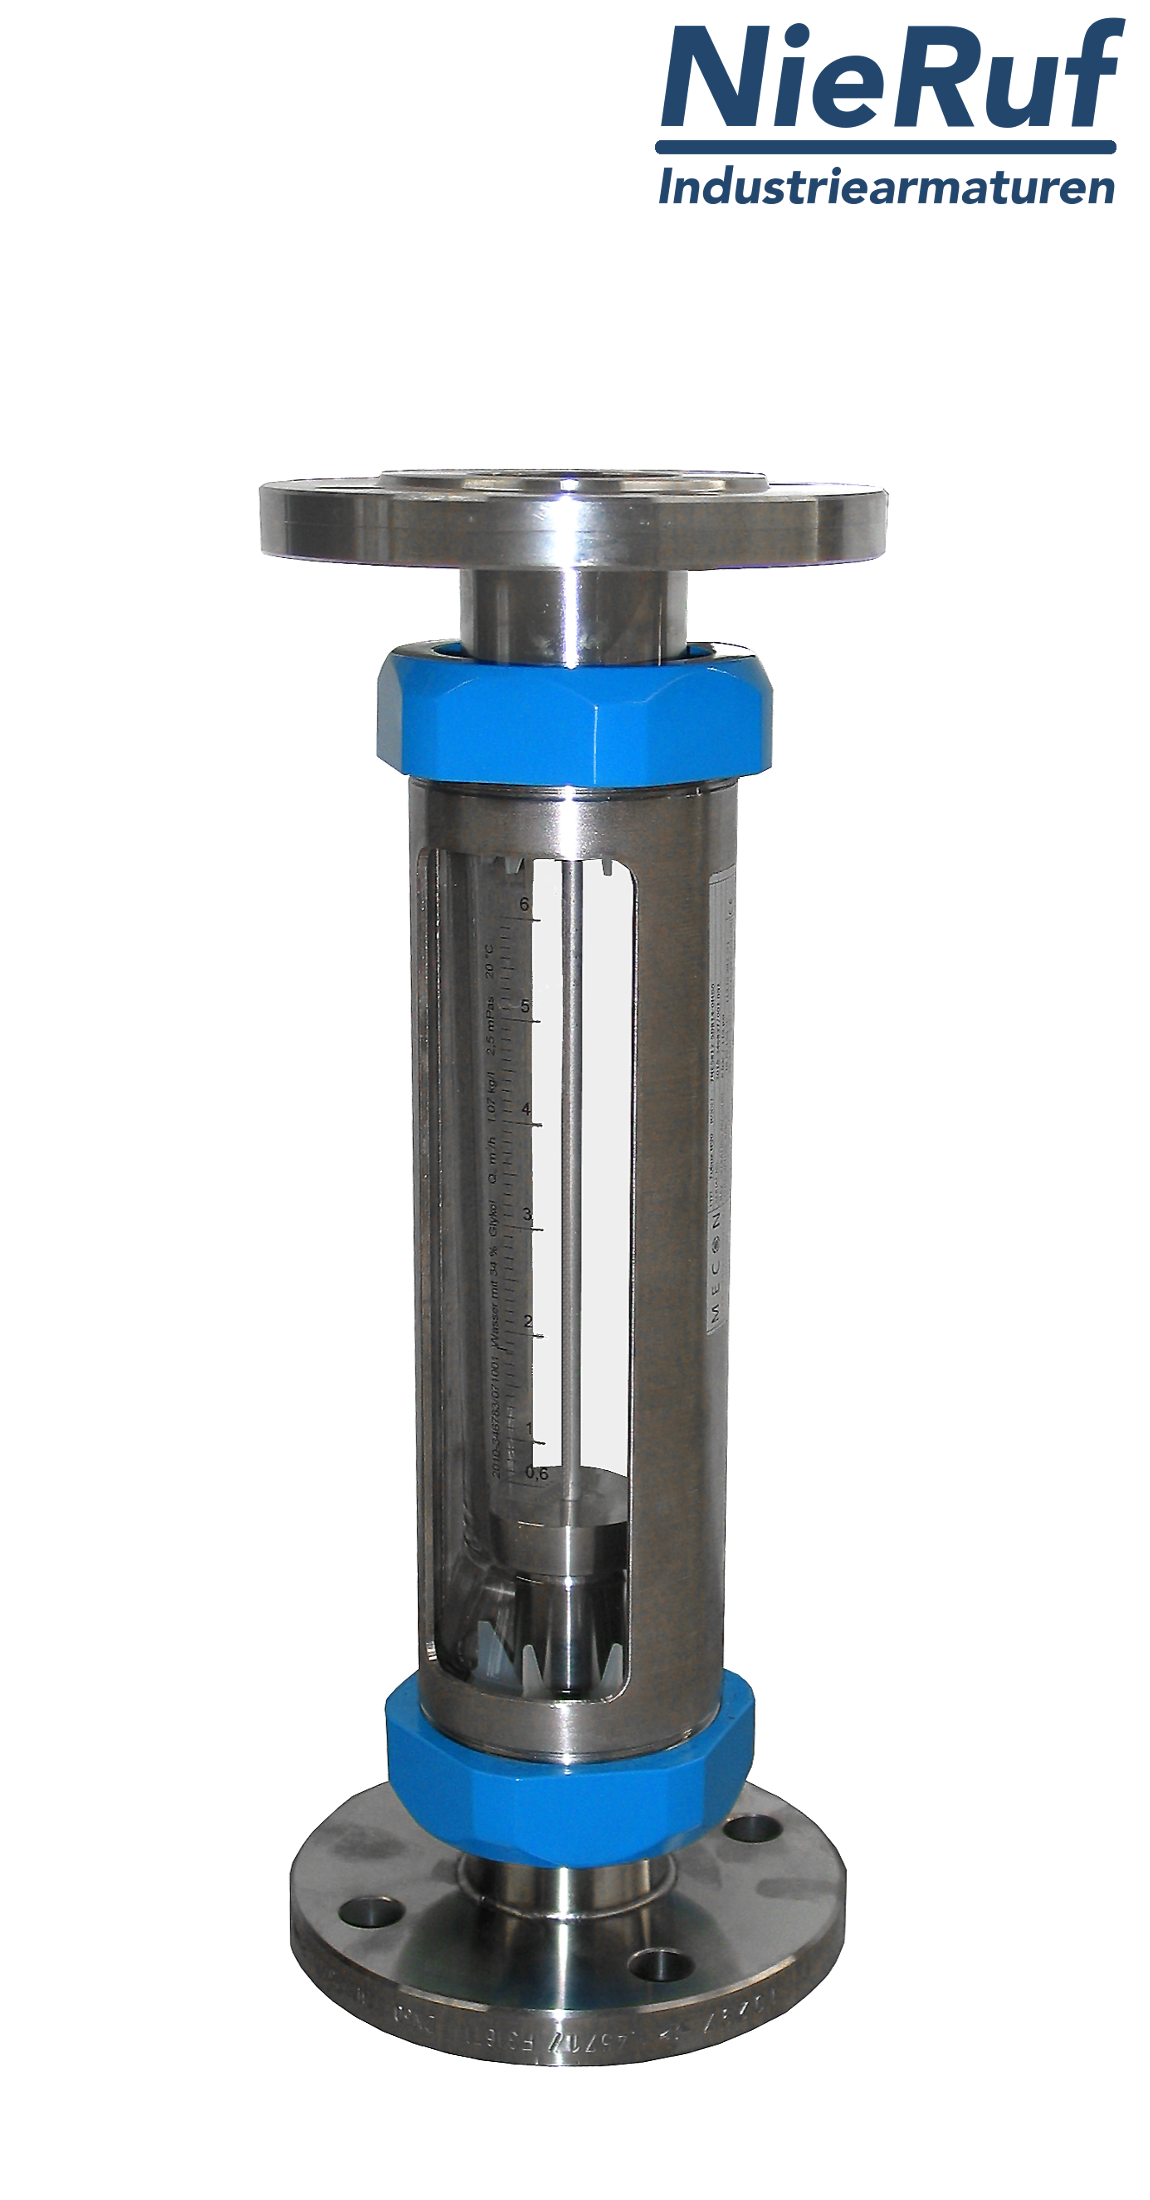 Variable area flowmeter stainless steel + borosilicate flange DN25 0.1 - 1.0 l/h water FKM